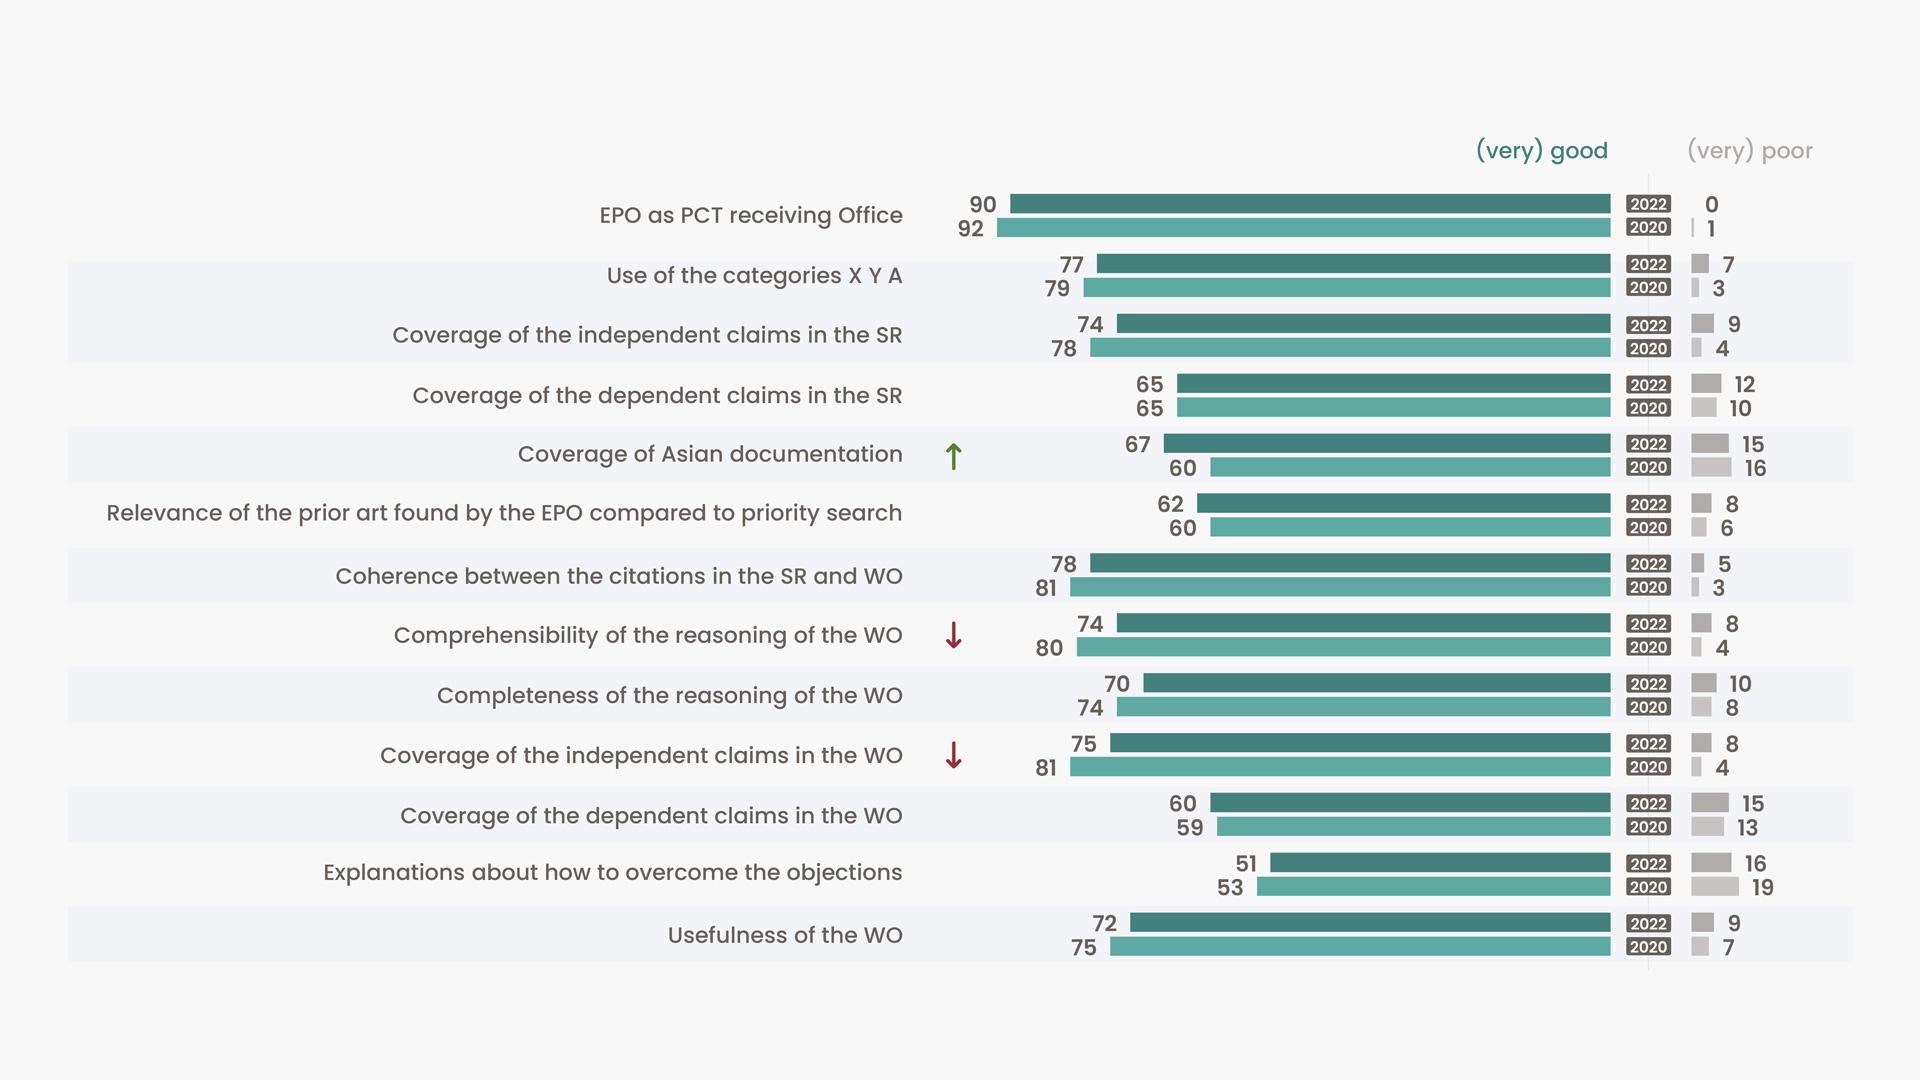 Breakdown of answers in the User Satisfaction Survey showing (very) good ratings were high in most categories